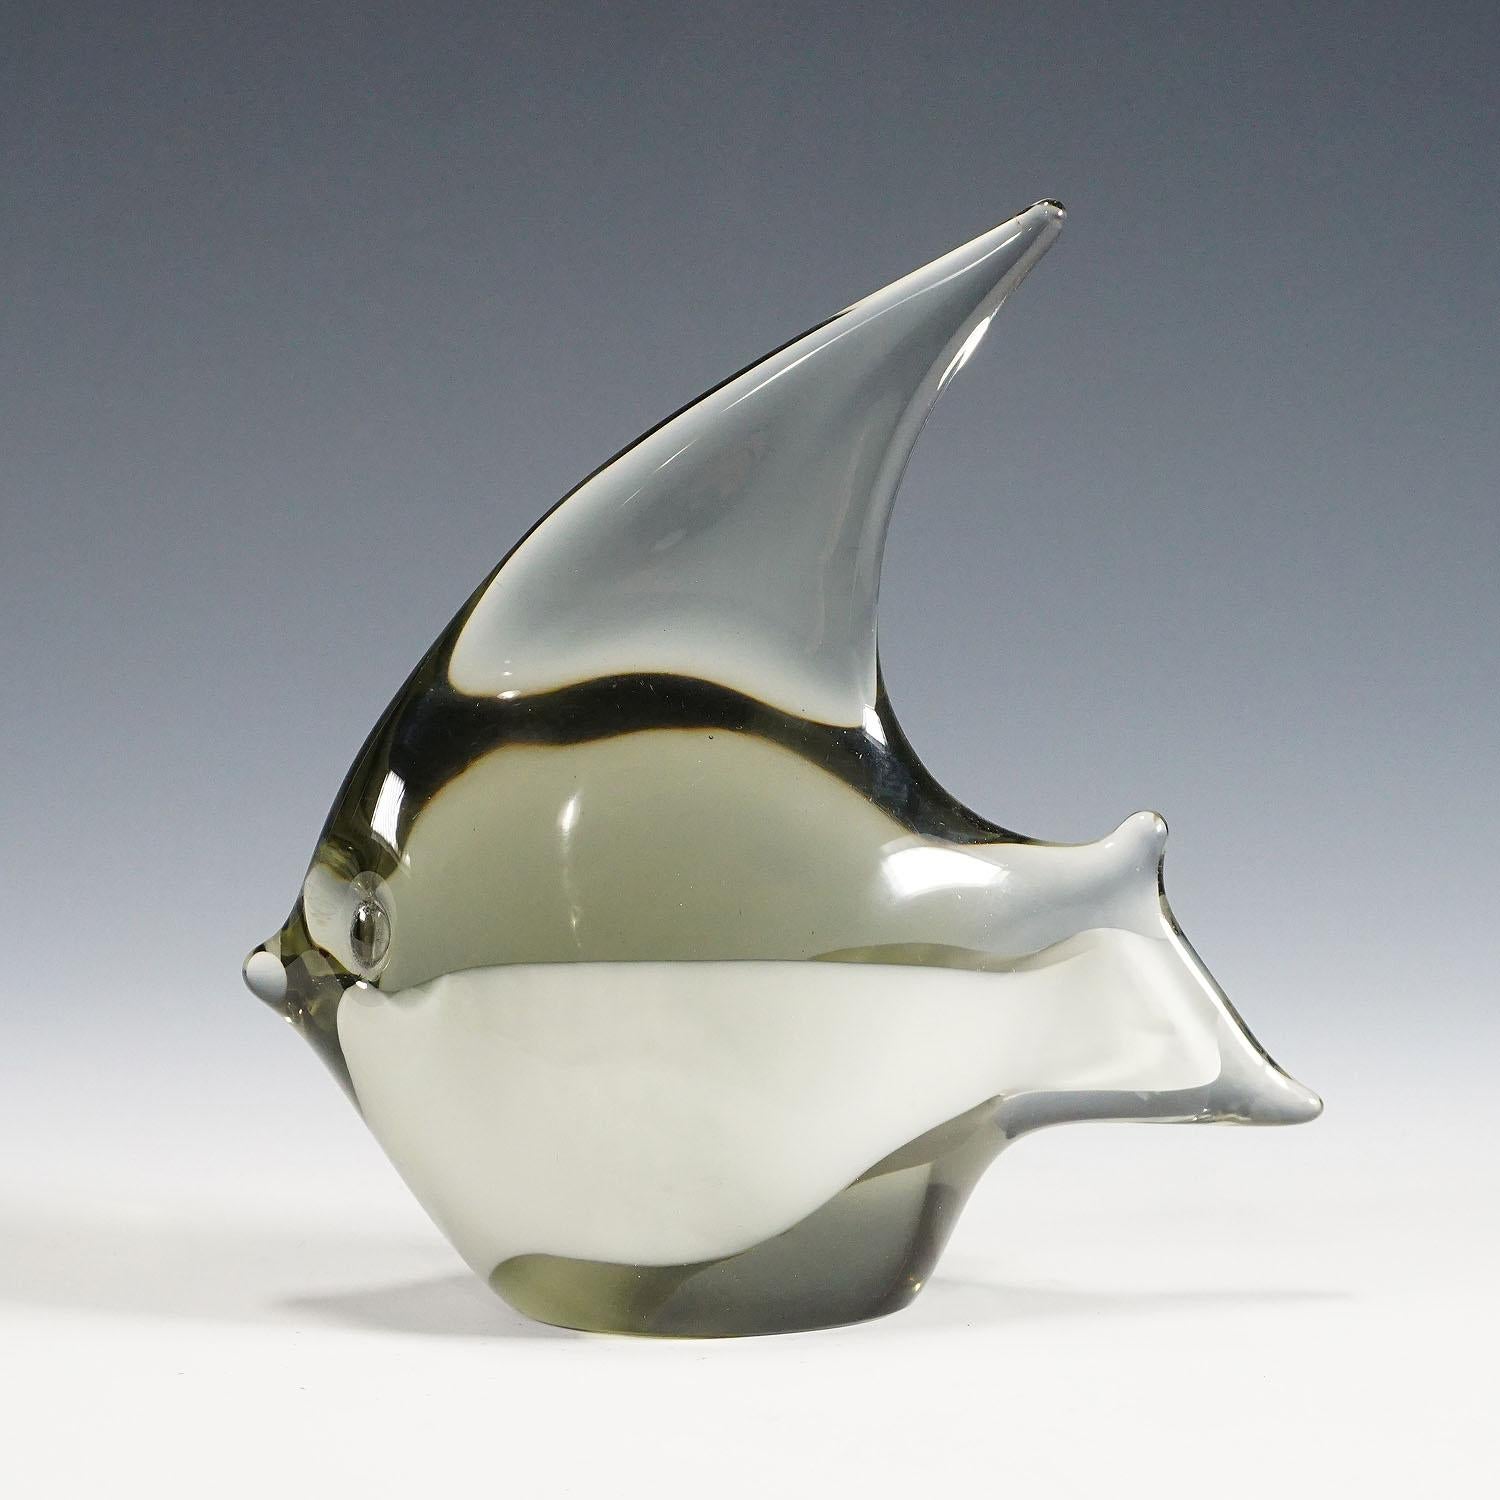 A sculpture of a stylized fish in smoke grey glass with white glass band. Hand made in the Gral glass manufactory, Germany. Designed by Livio Seguso ca. 1970. Incised signature of the artist (LS) on the base.

Livio Seguso (* 1930) comes from a